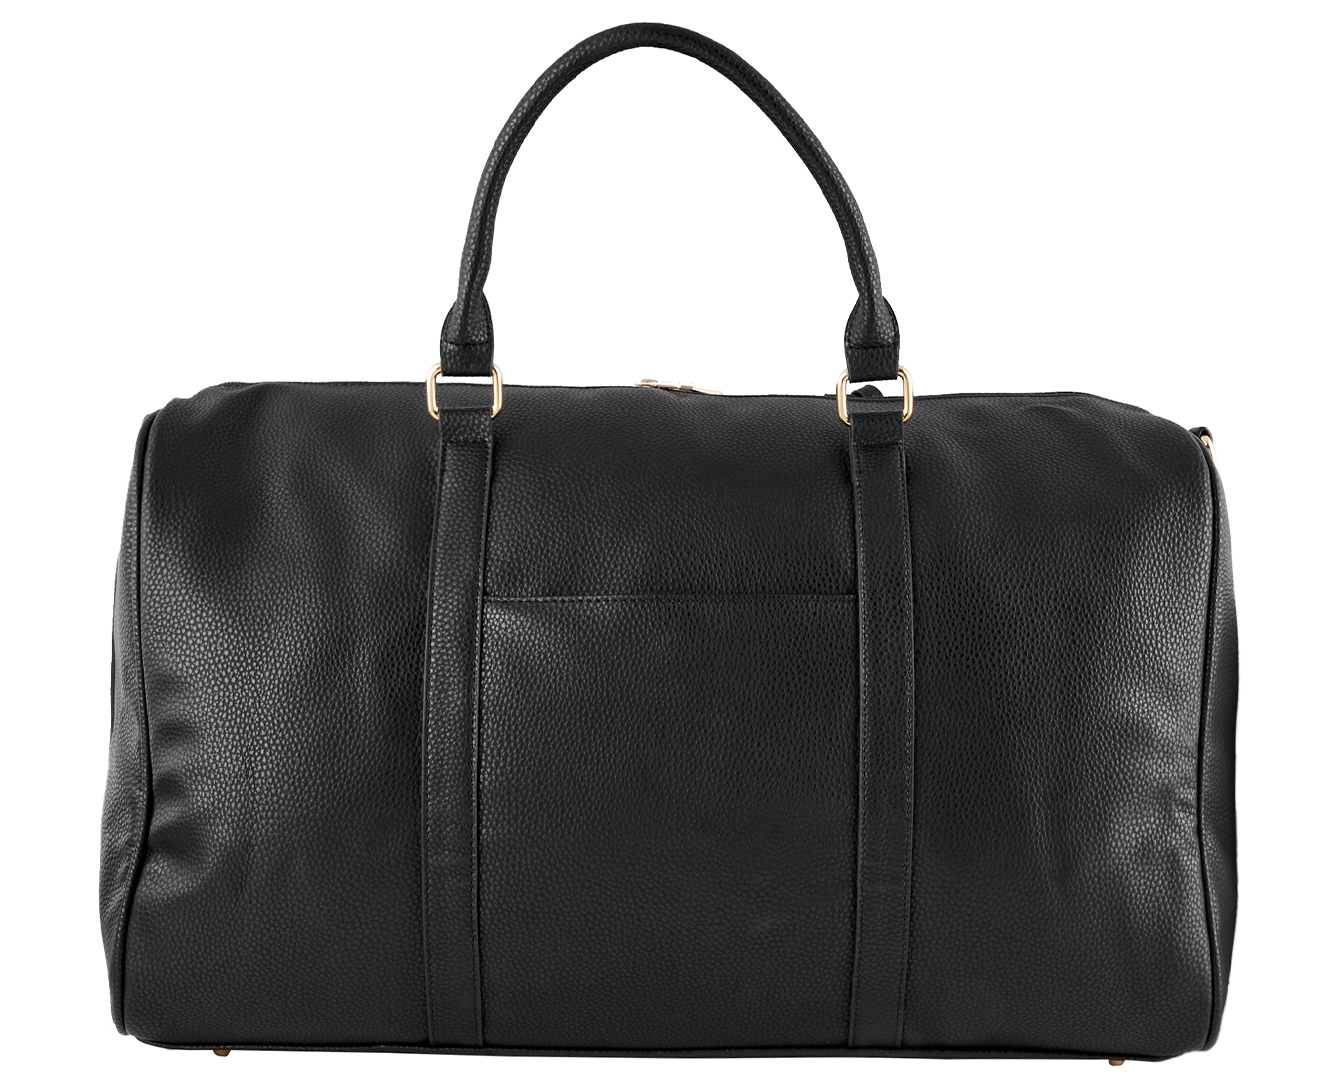 Kate Hill Overnight Holdall Bag - Black | Catch.co.nz